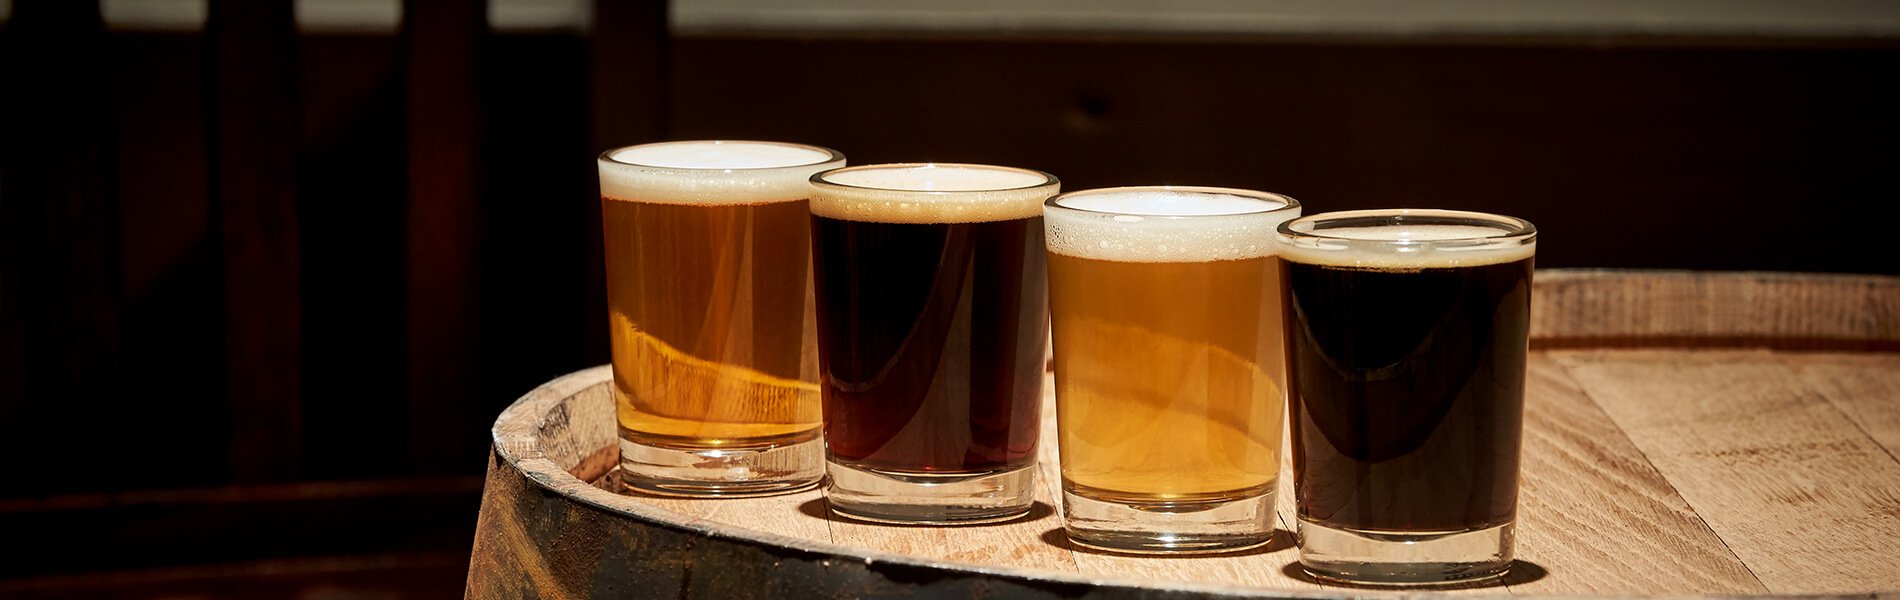 Beer-enthusiast’s paradise - sample hand-crafted brews from around the world.